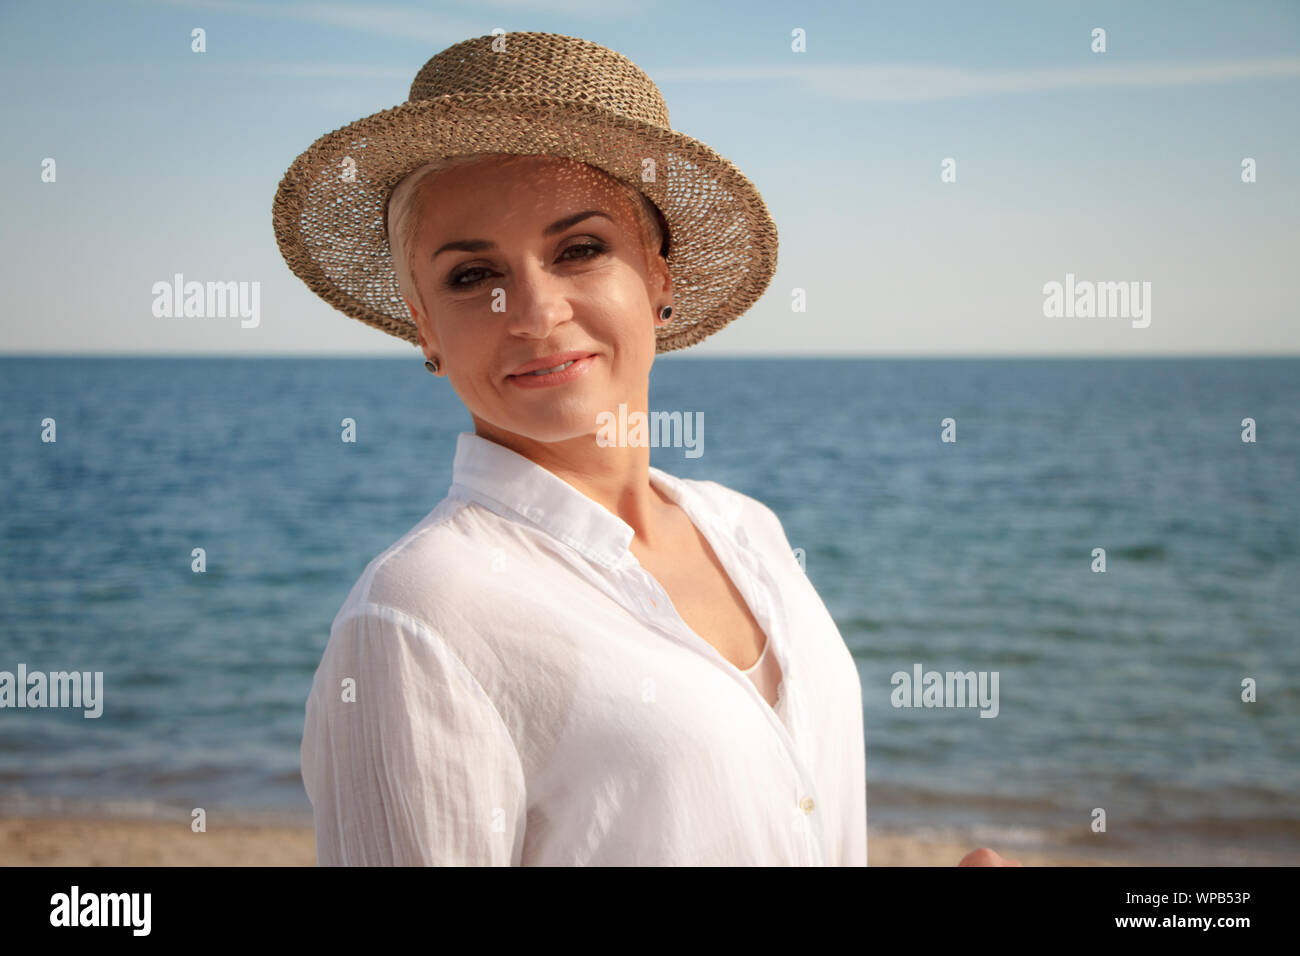 Lovely Young Woman With A Short Haircut In A Beach Hat On The